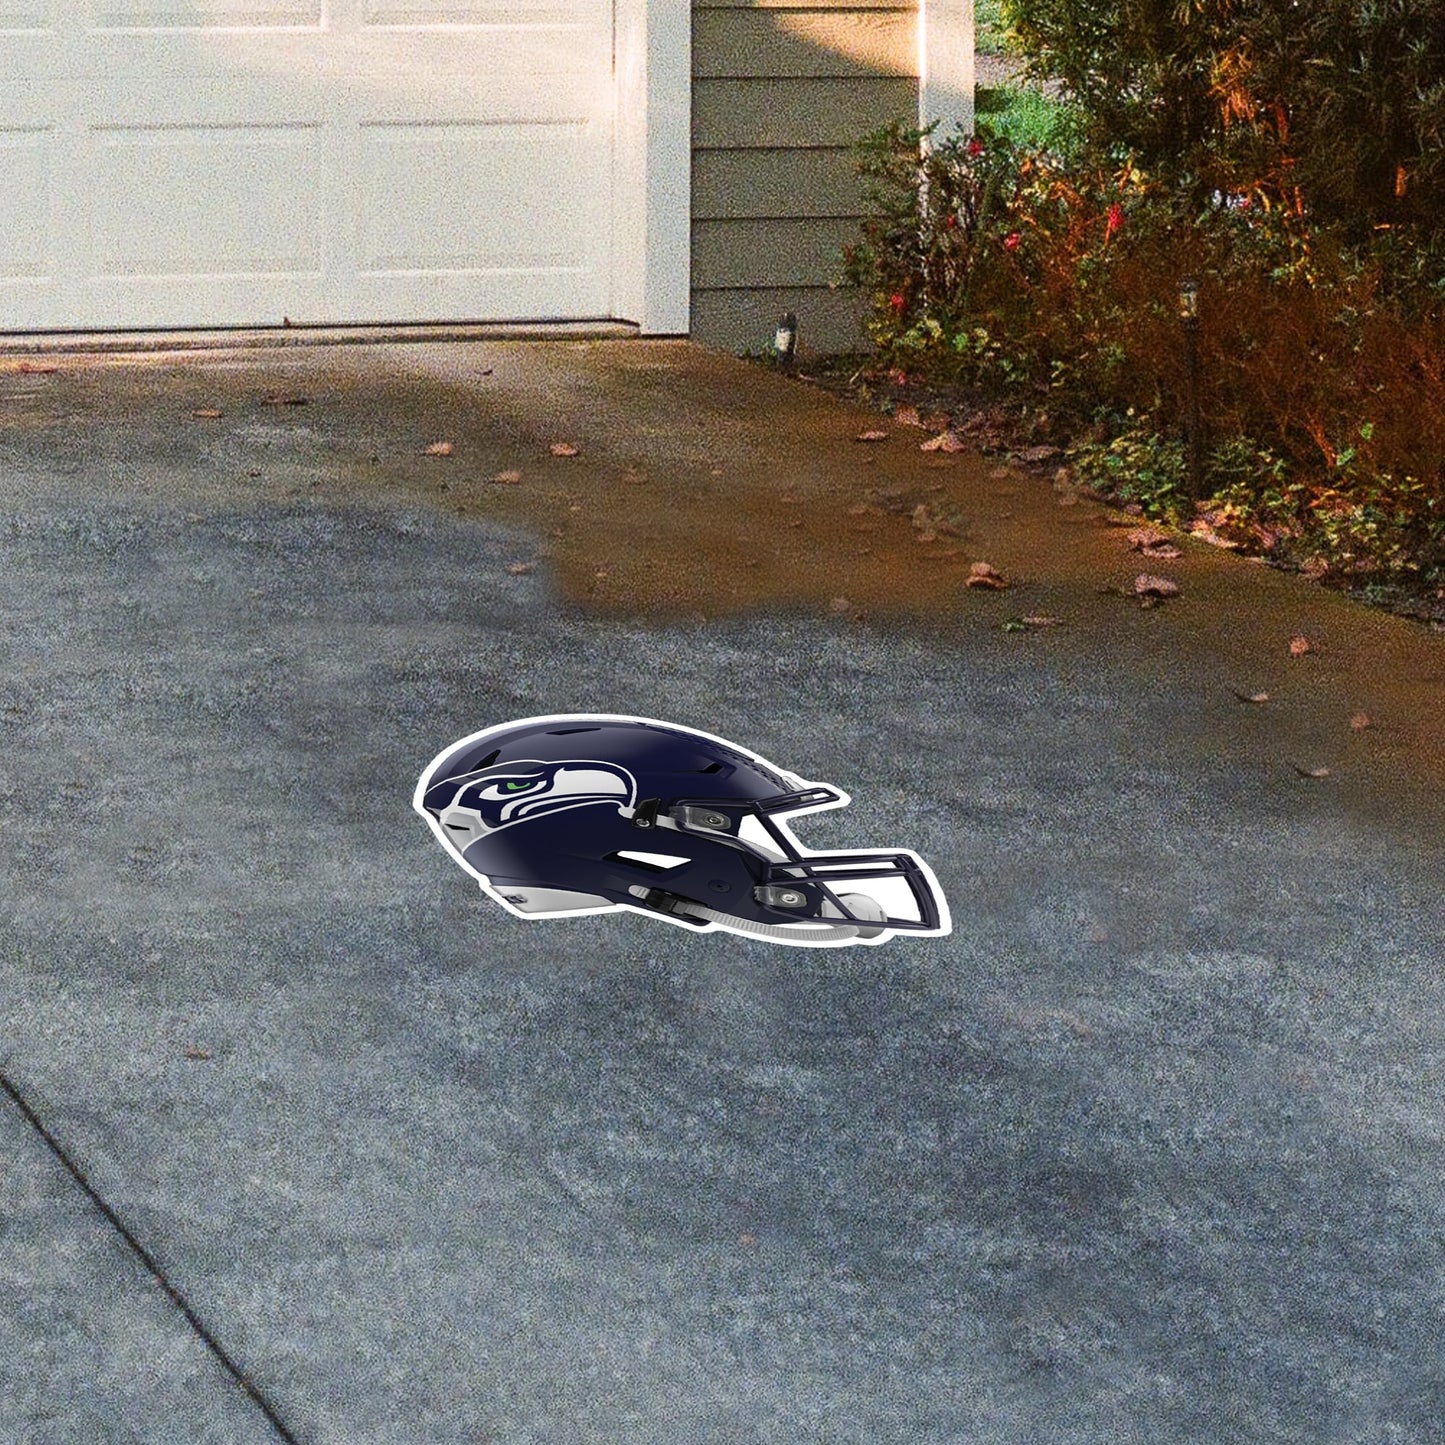 Seattle Seahawks: Outdoor Helmet - Officially Licensed NFL Outdoor Graphic